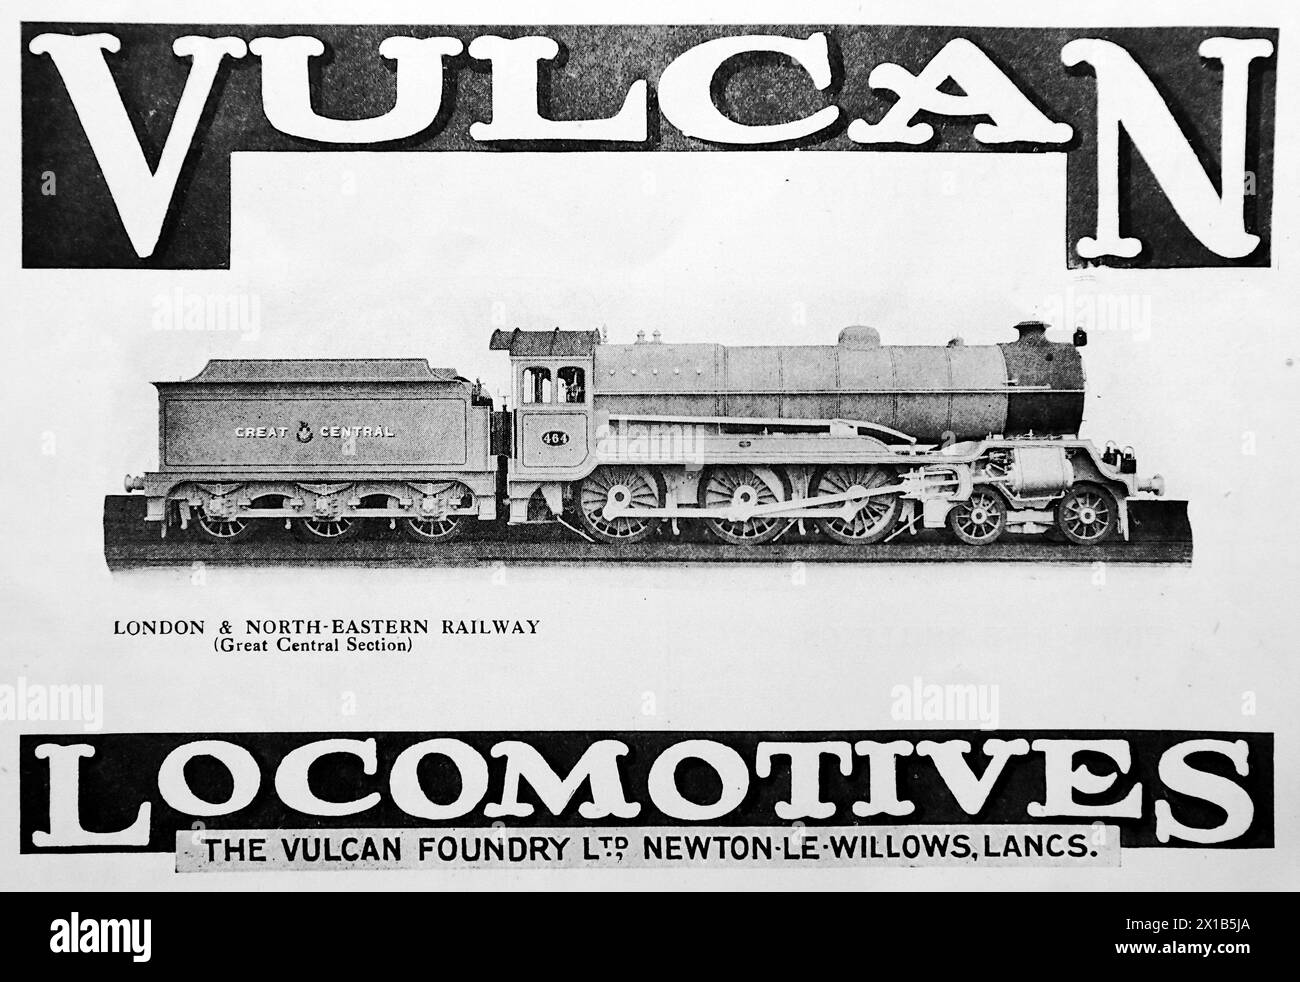 Advertisement for Vulcan Locomotives of Newton-le-Willows, Lancashire. Pictured is a London and North-Eastern Railways Great Central Locomotive. From an original publication dated 15 May 1924, this helps to give an insight into public transport, and the railways in particular, of the 1920s. Stock Photo